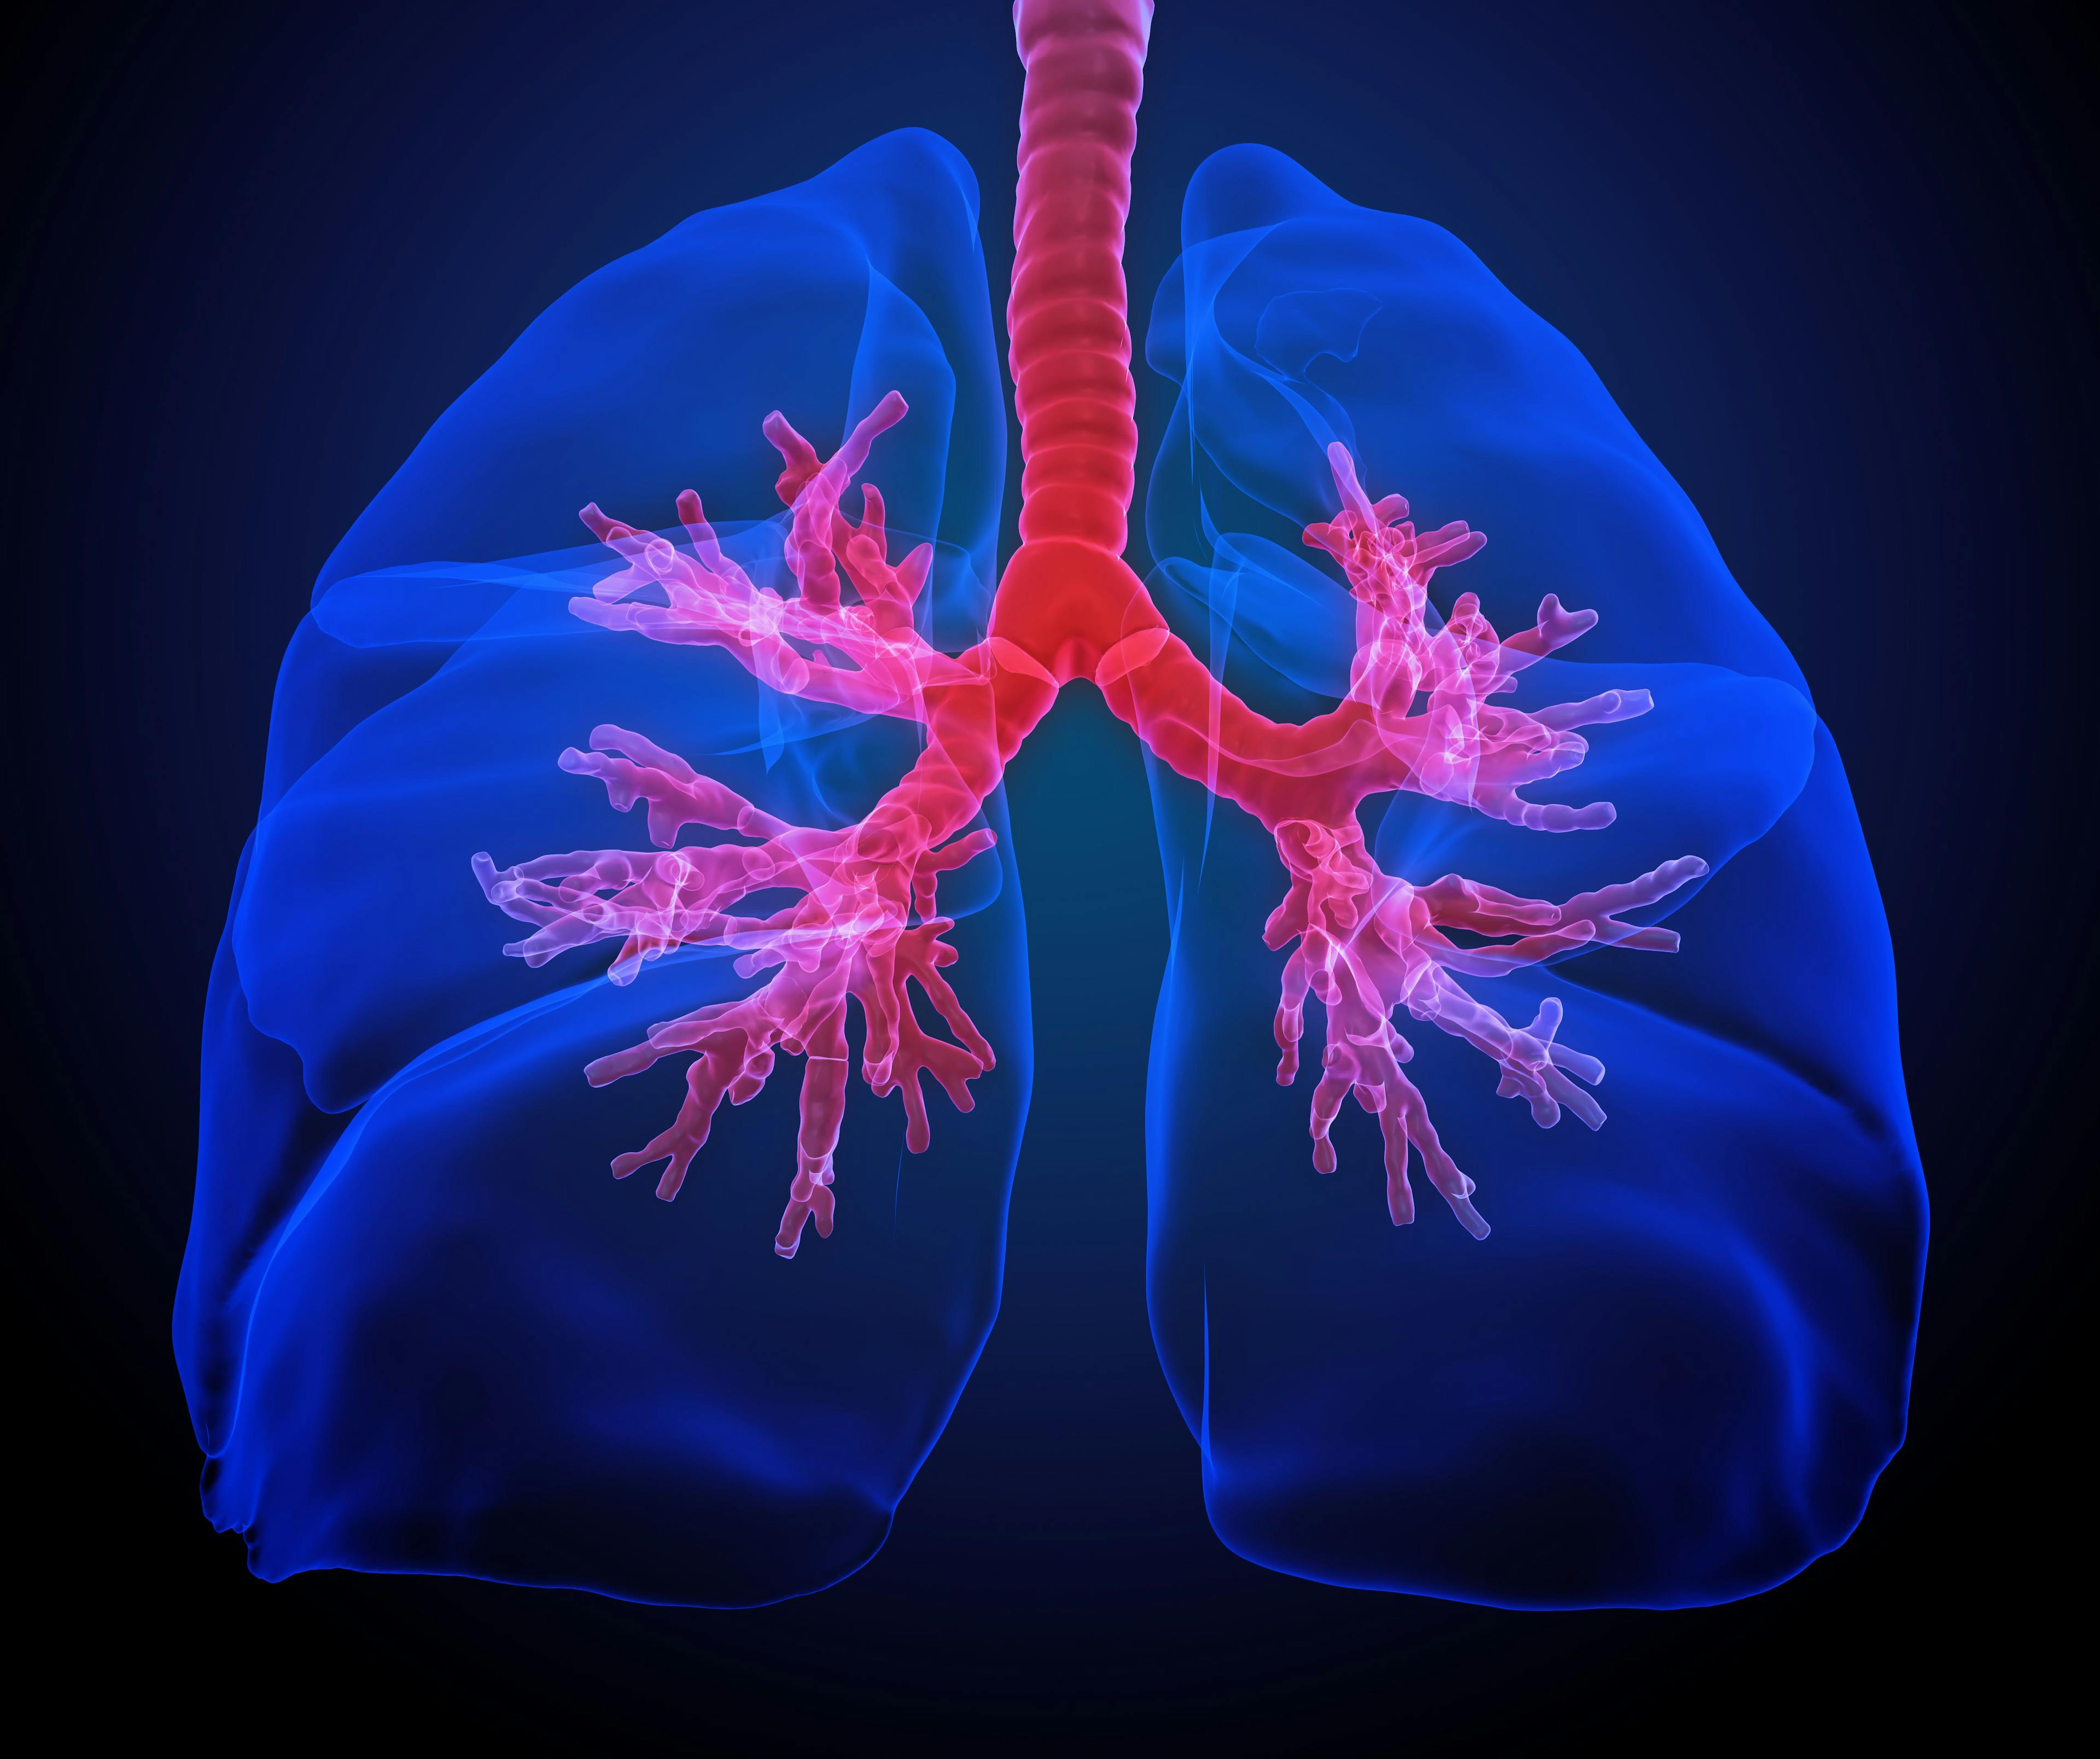 Illustration of human lungs: © Mopic - stock.adobe.com